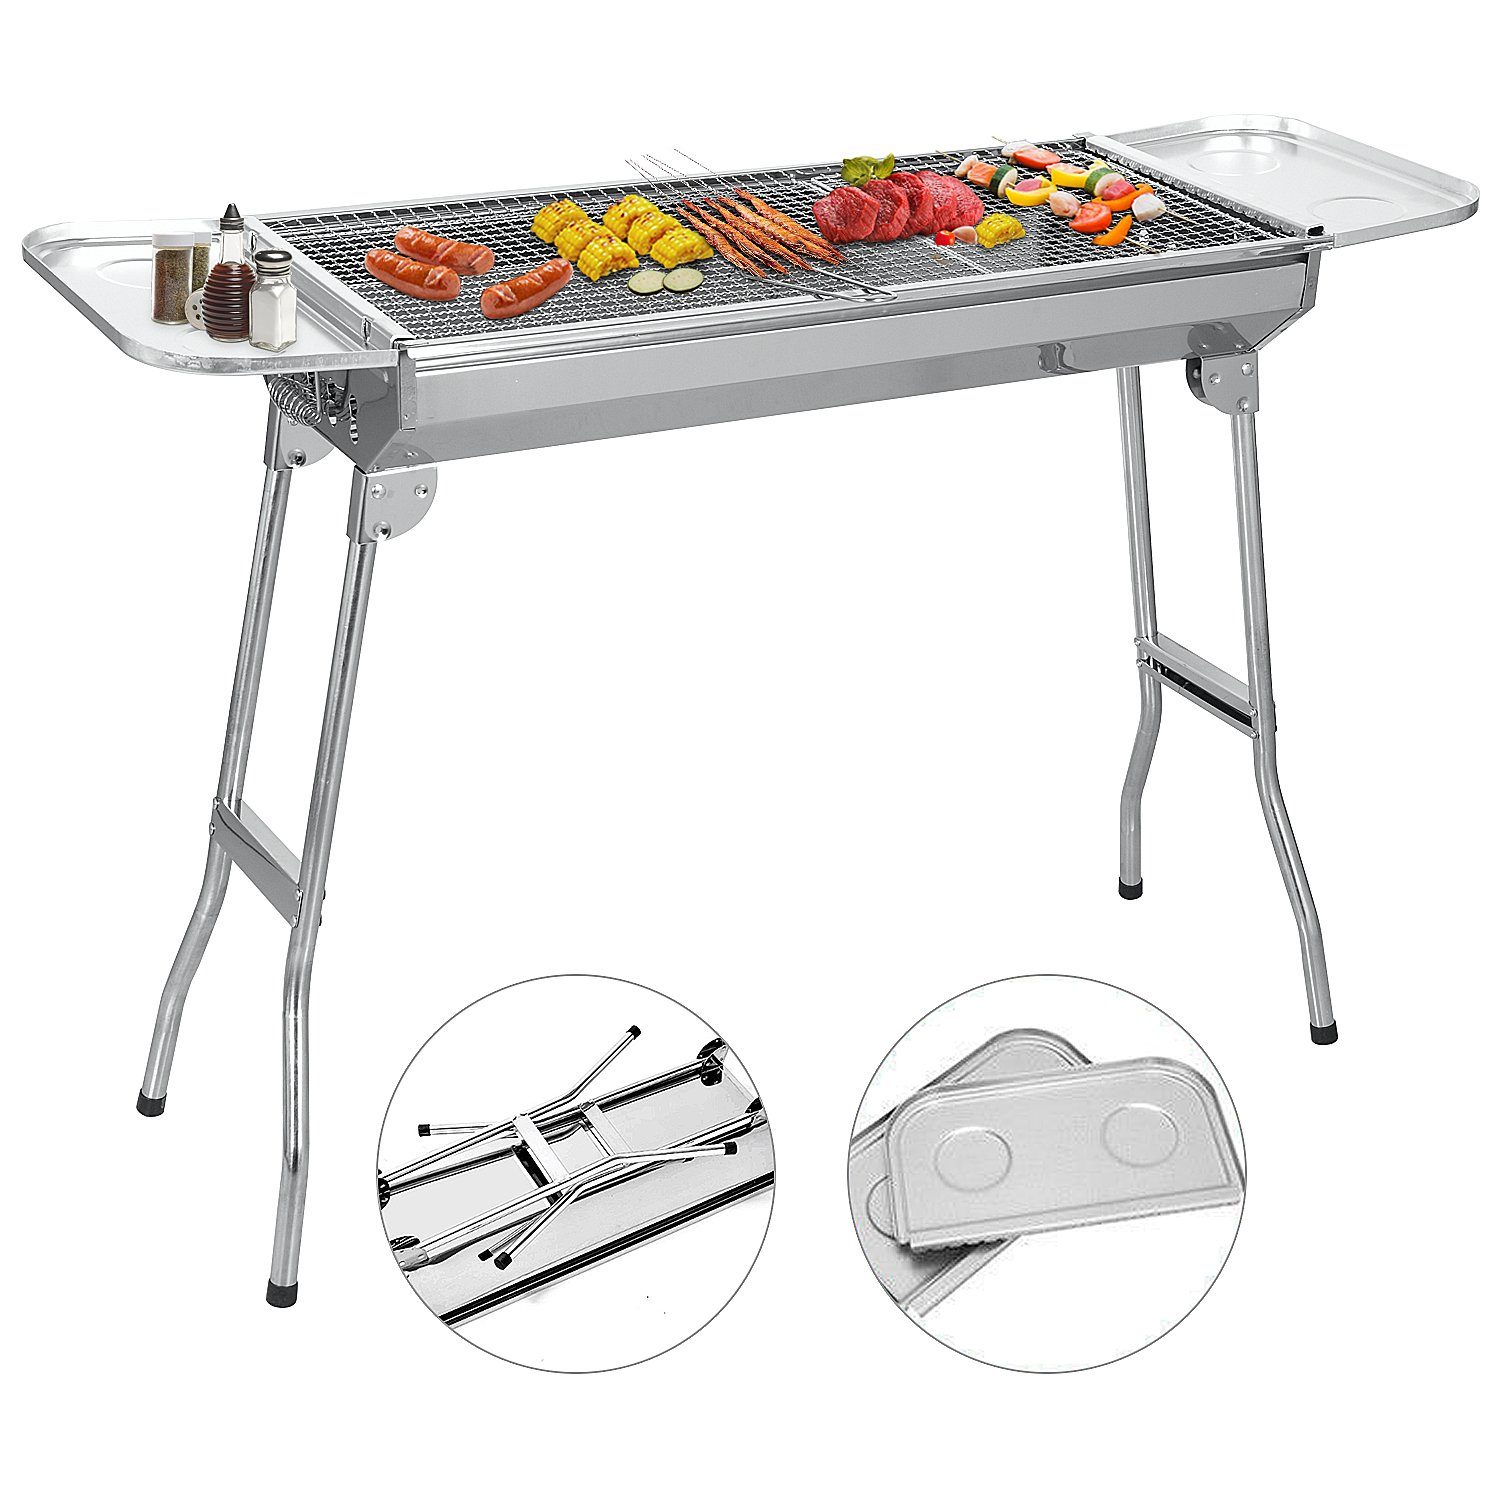 Tragbar Holzkohlegrill Klappgrill BBQ Outdoor Standgrill Camping Grill Edelstahl 